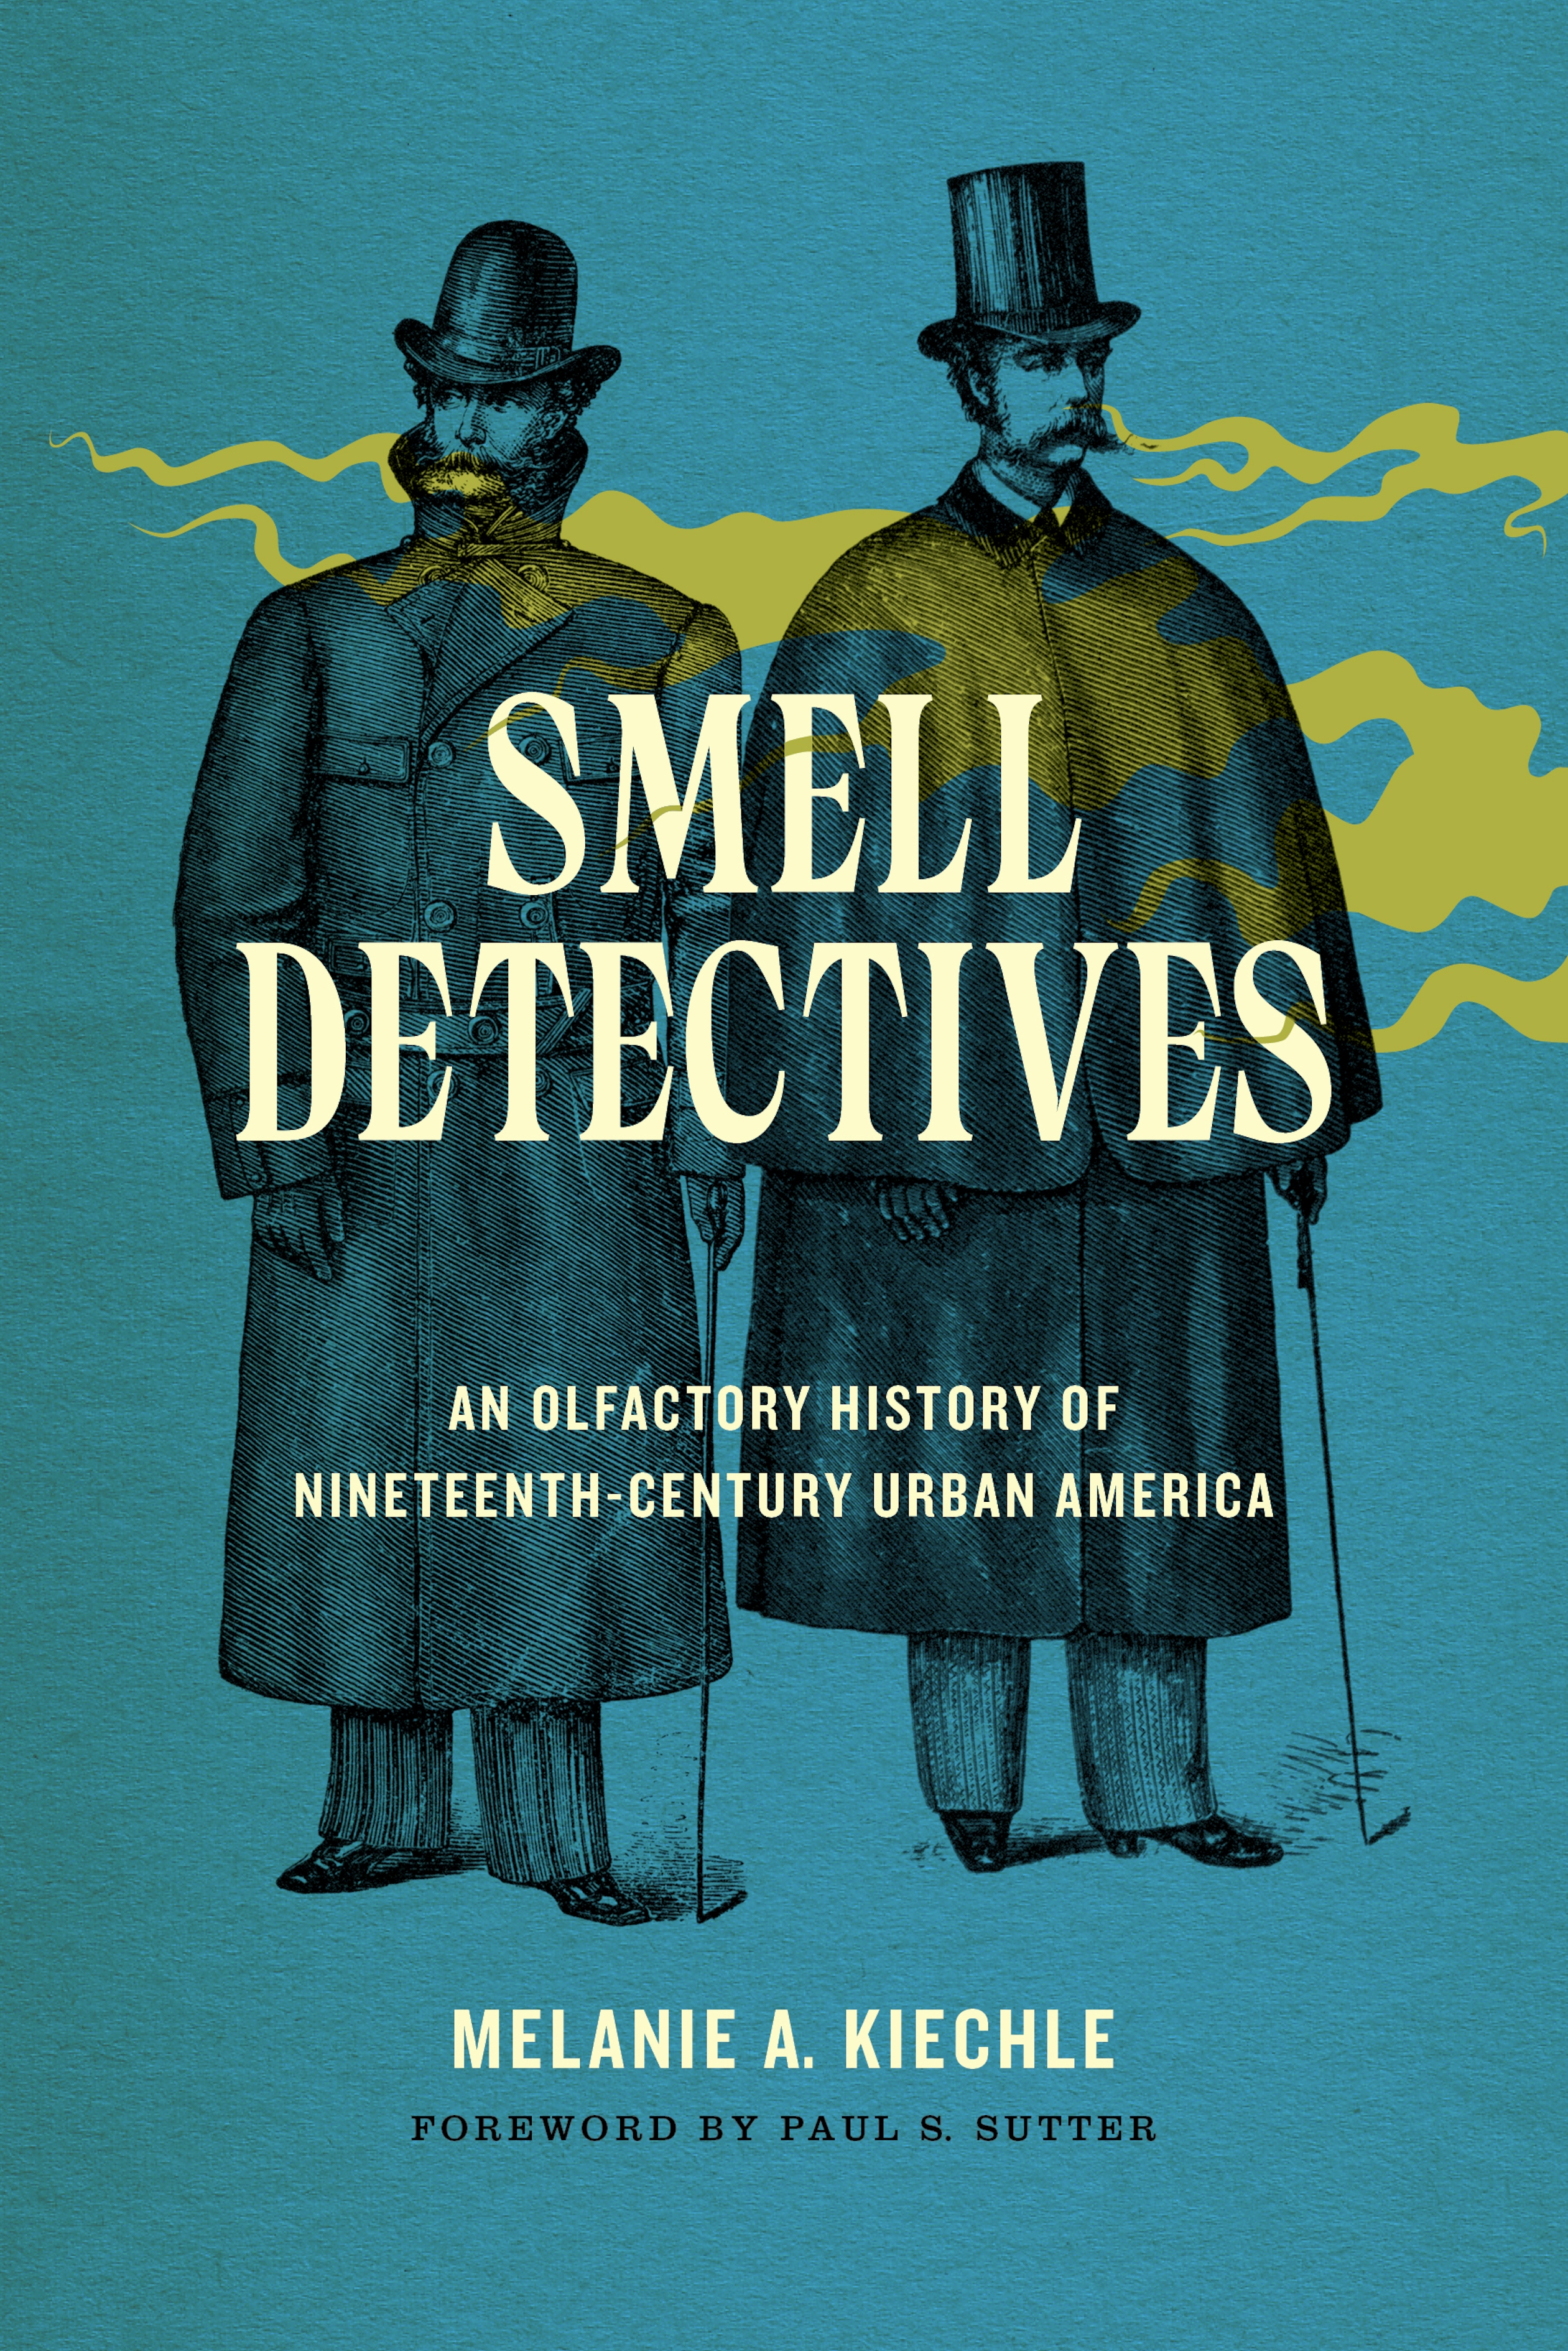 Smell Detectives